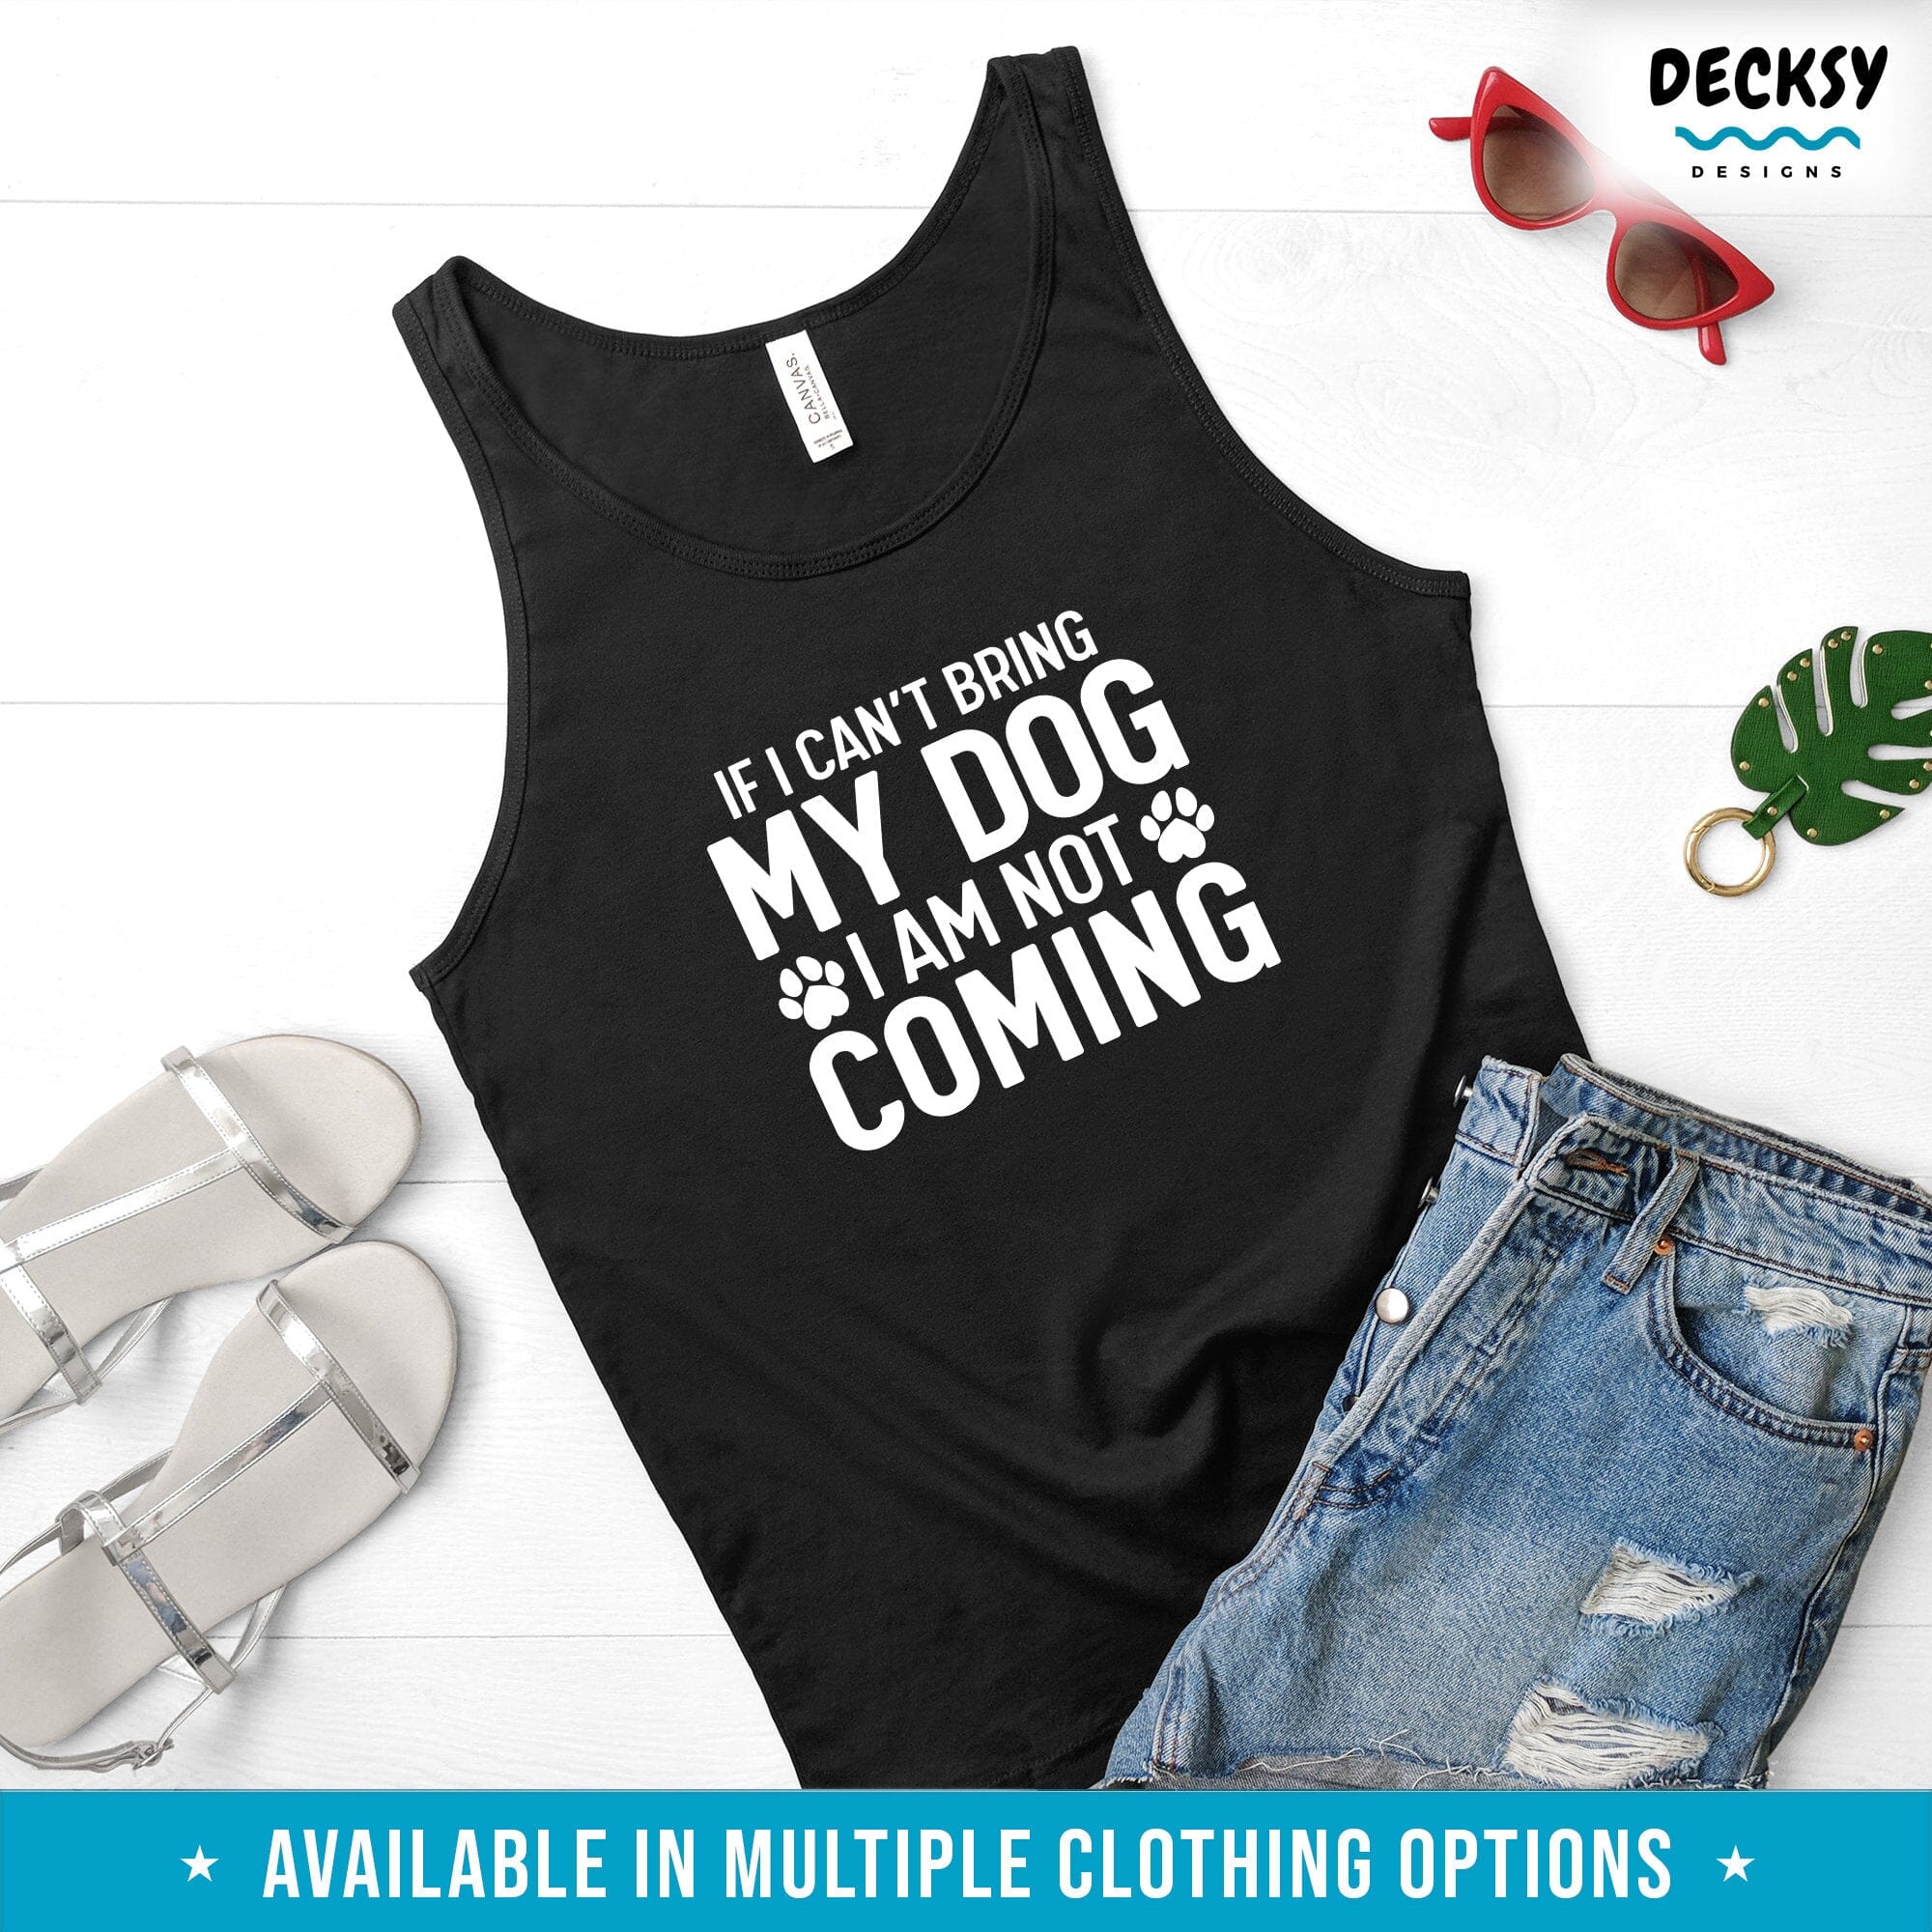 Dog Shirt, Gift For Dog Lover-Clothing:Gender-Neutral Adult Clothing:Tops & Tees:T-shirts:Graphic Tees-DecksyDesigns